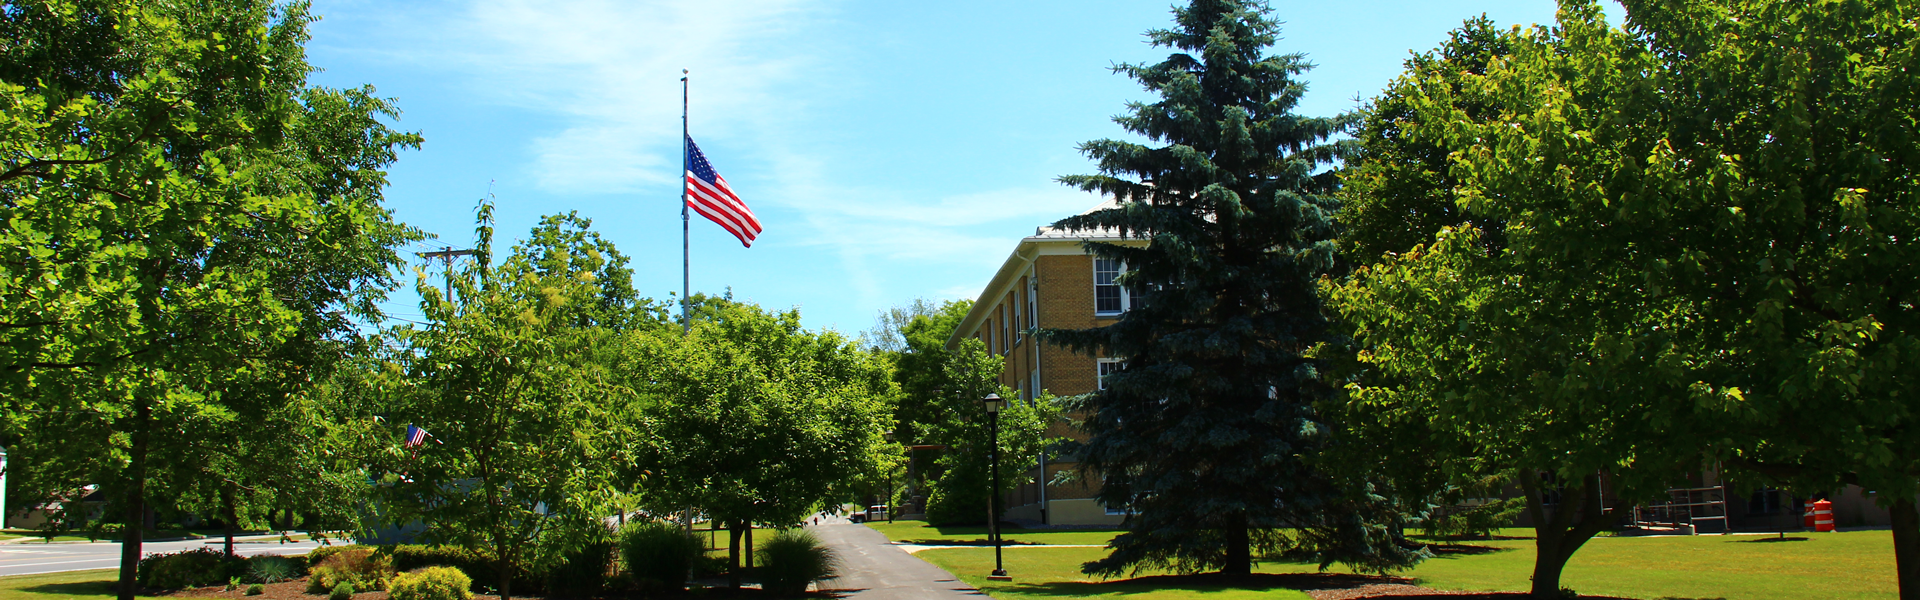 Campus path with flag